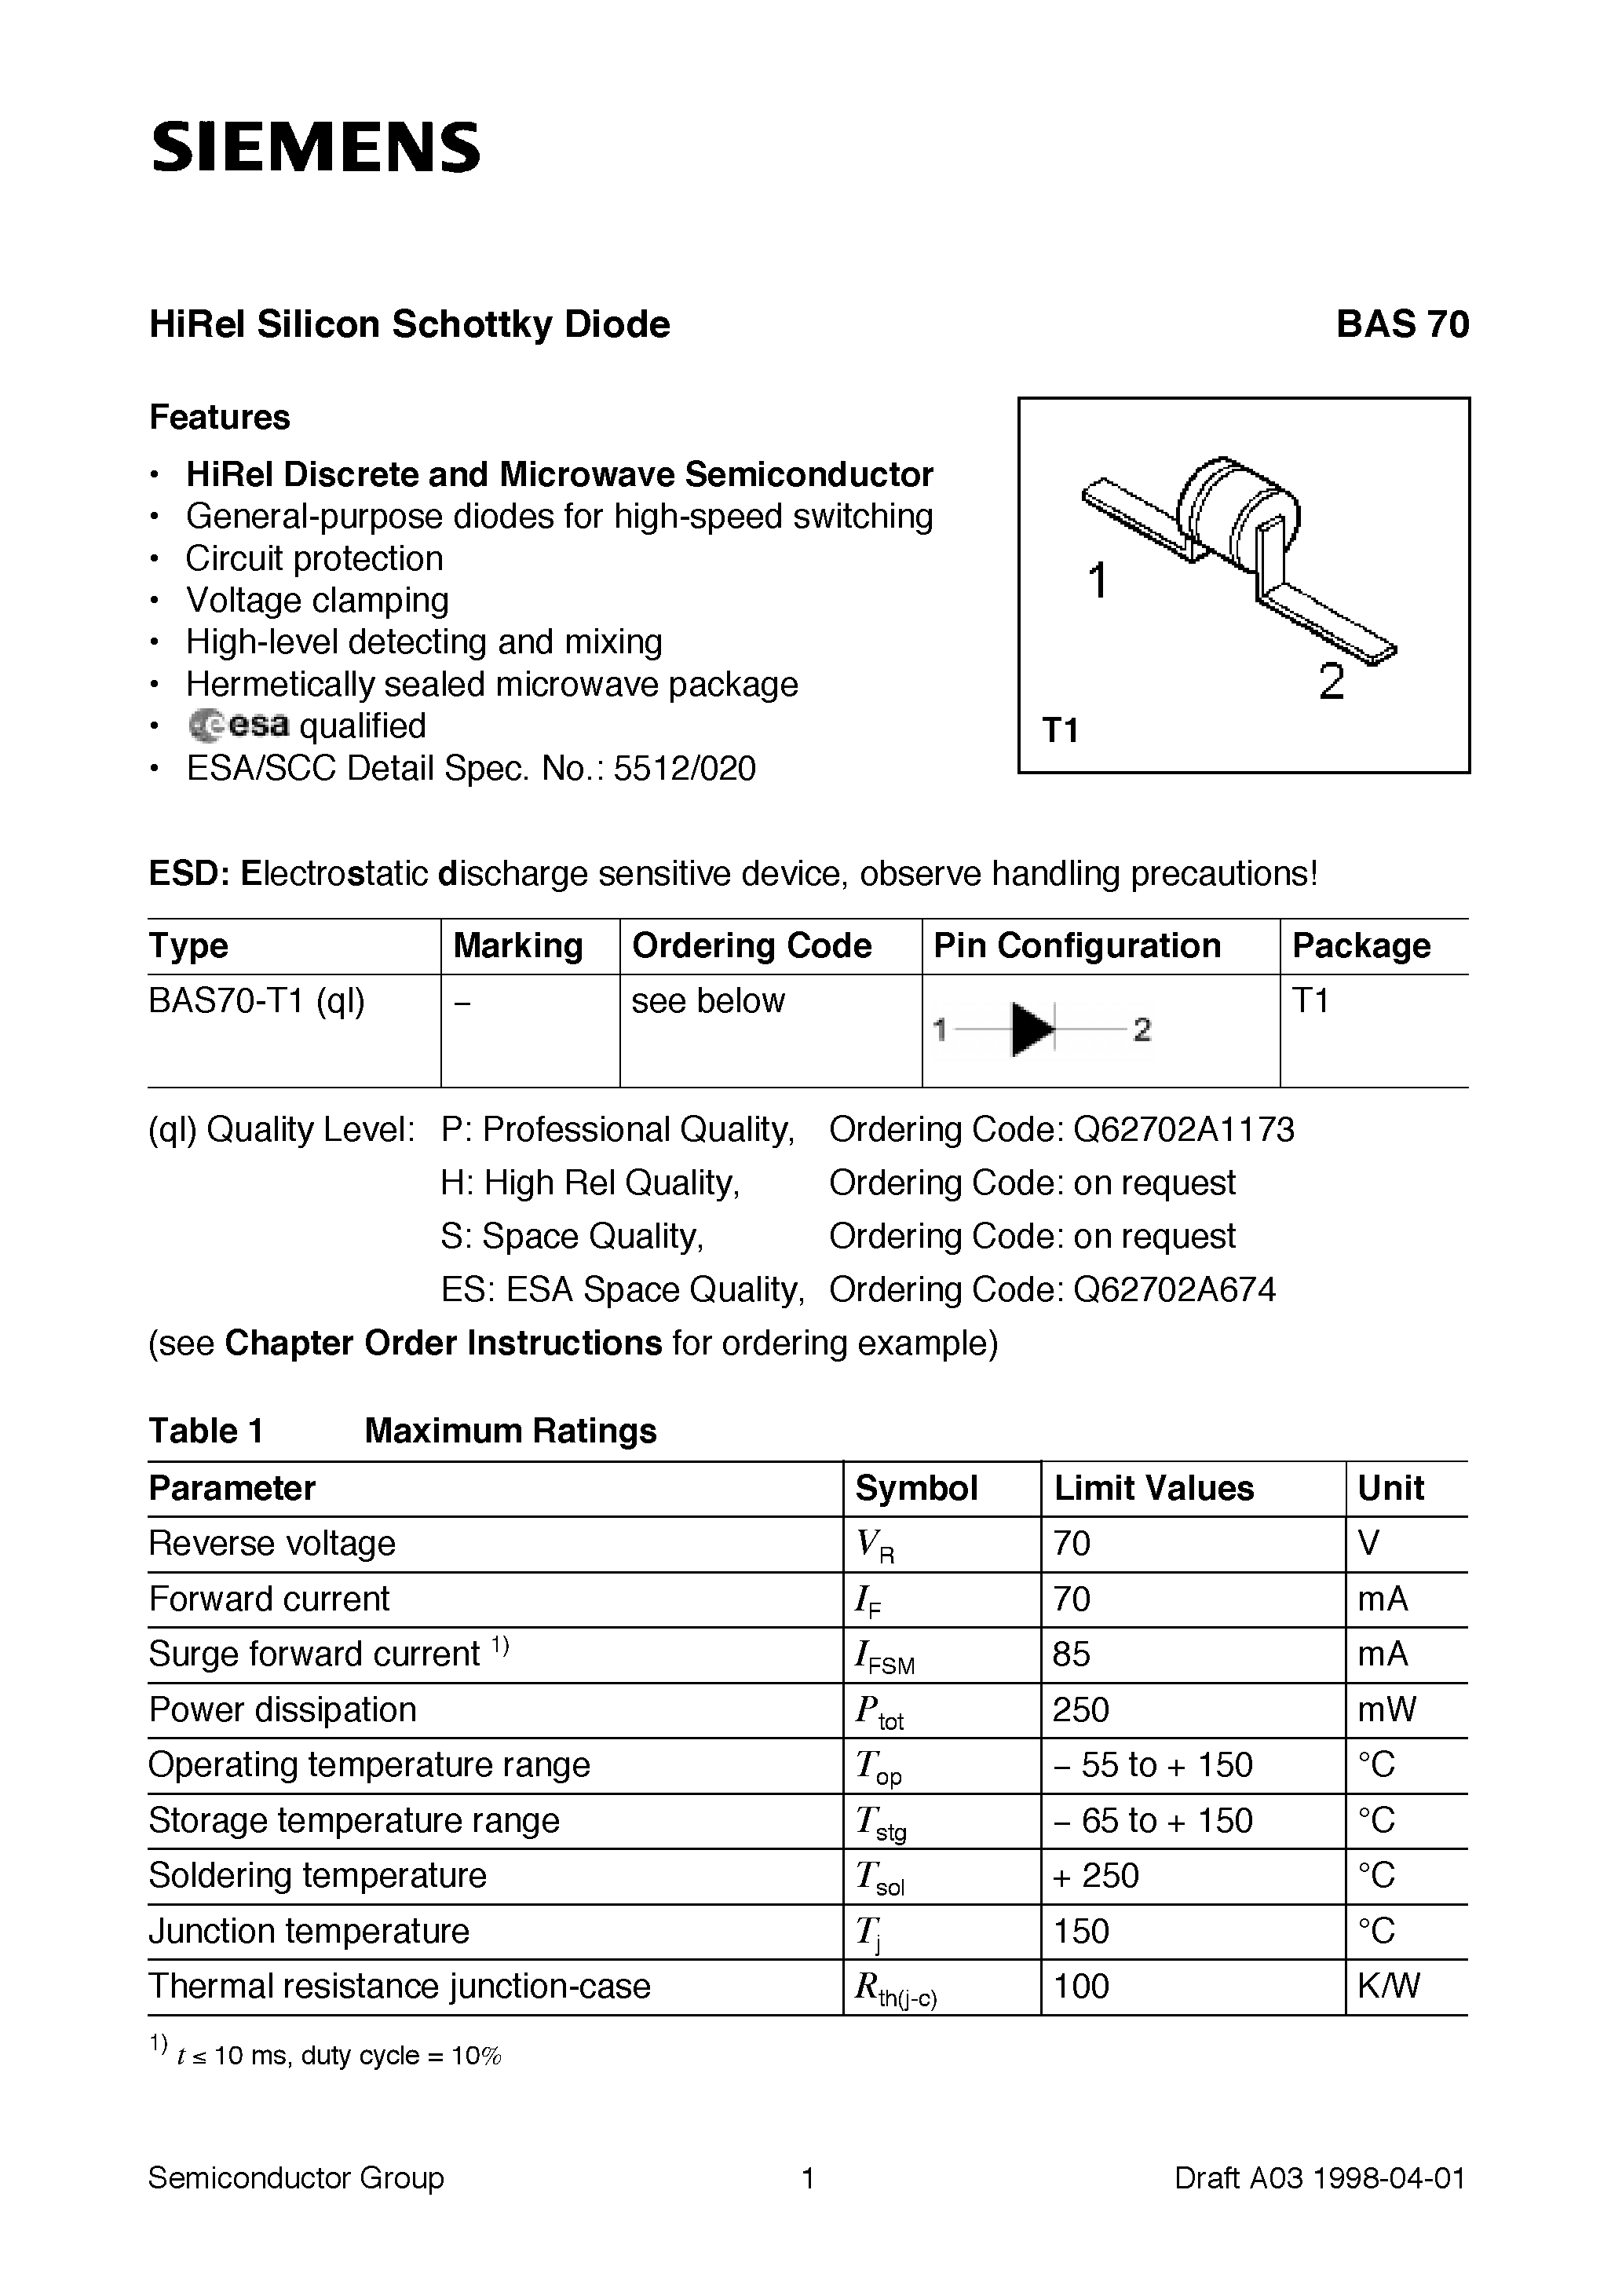 Datasheet BAS70-T1 - HiRel Silicon Schottky Diode (HiRel Discrete and Microwave Semiconductor General-purpose diodes for high-speed switching) page 1